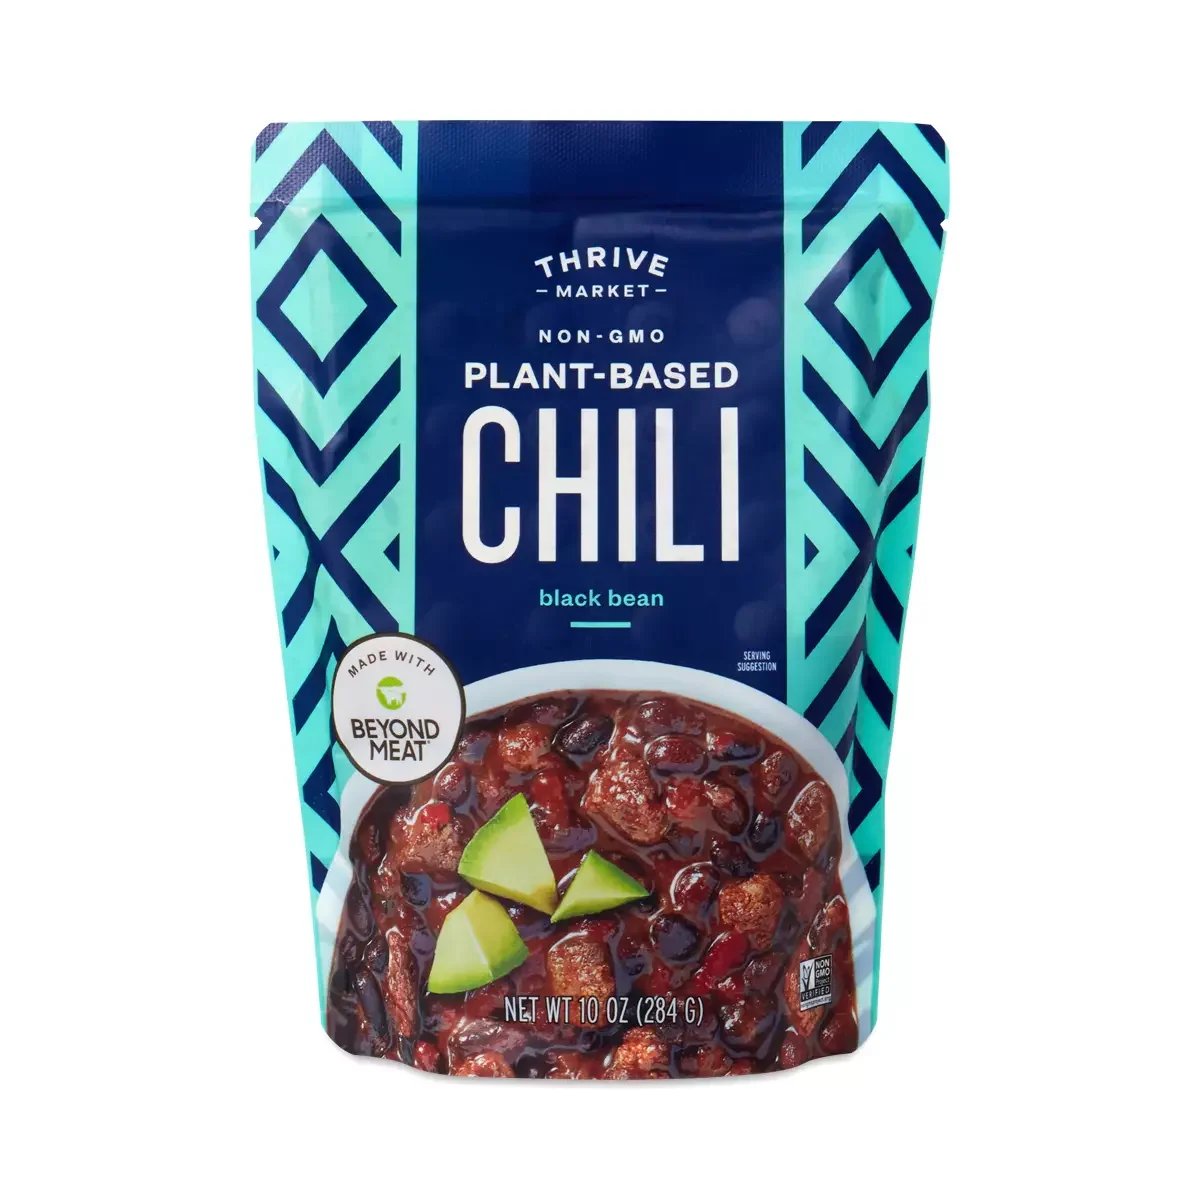 Plant-Based Chili with Beyond Meat®, Black Bean